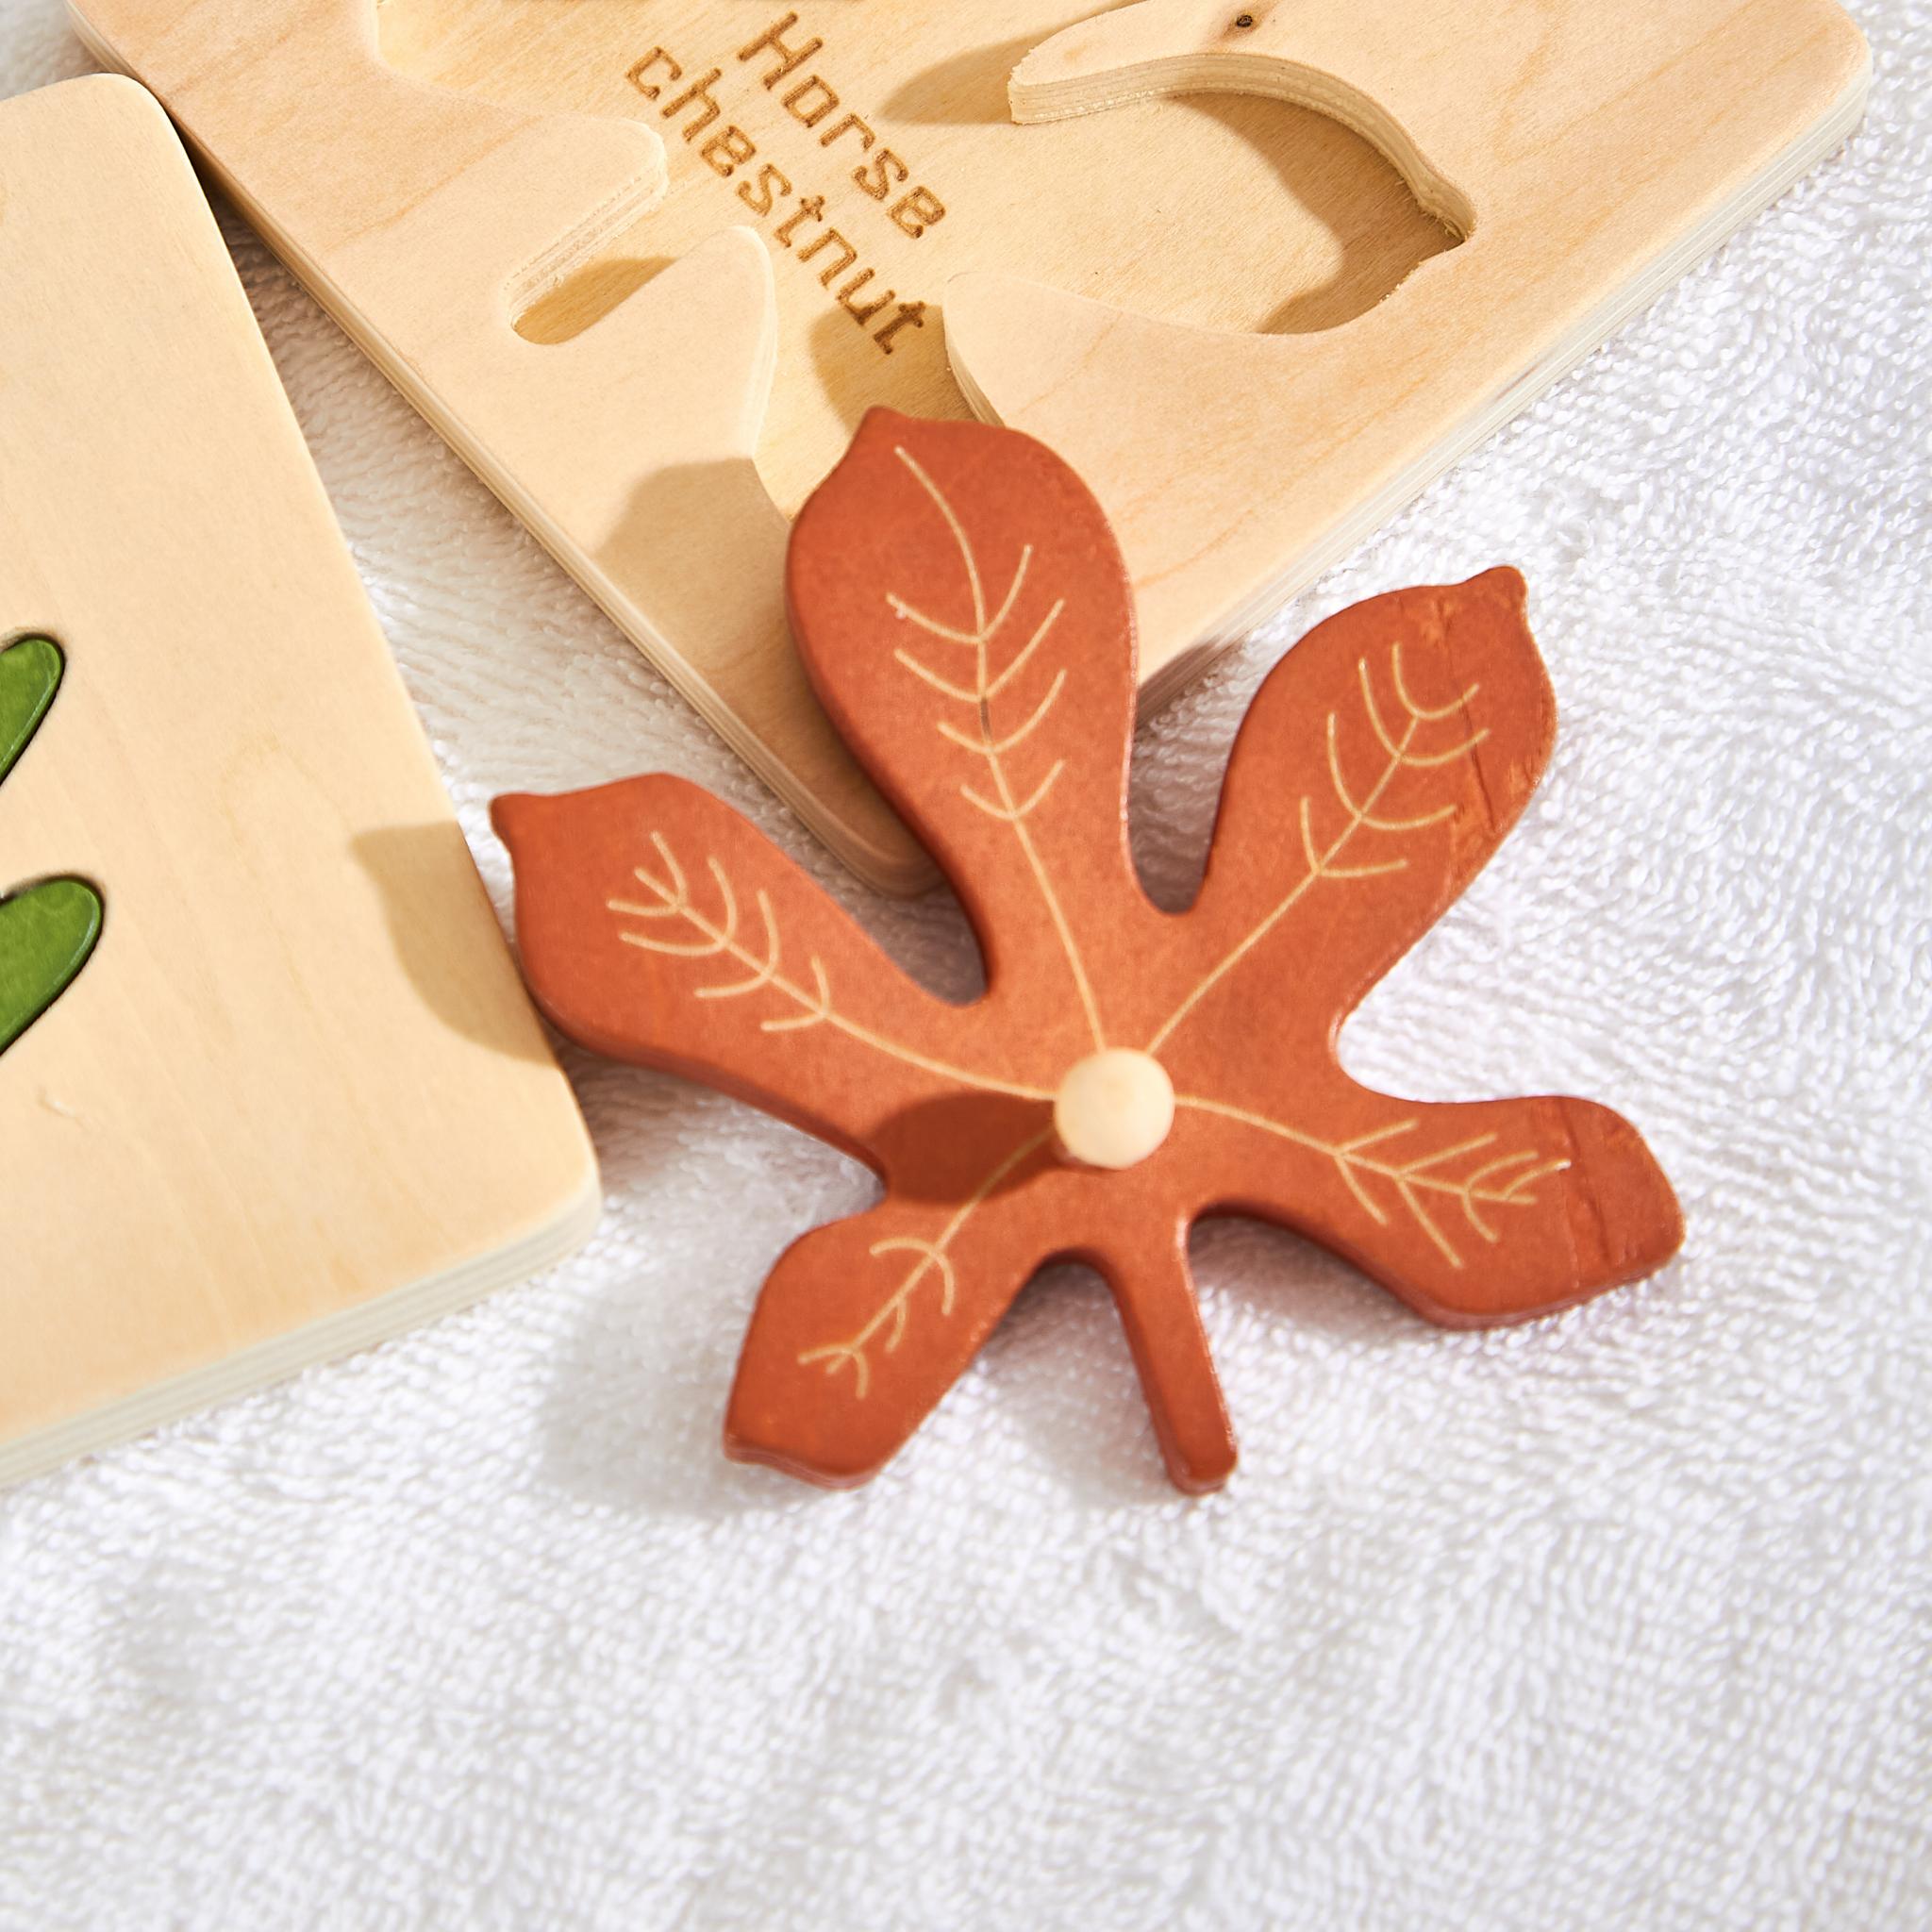 Holz Puzzle Leaves